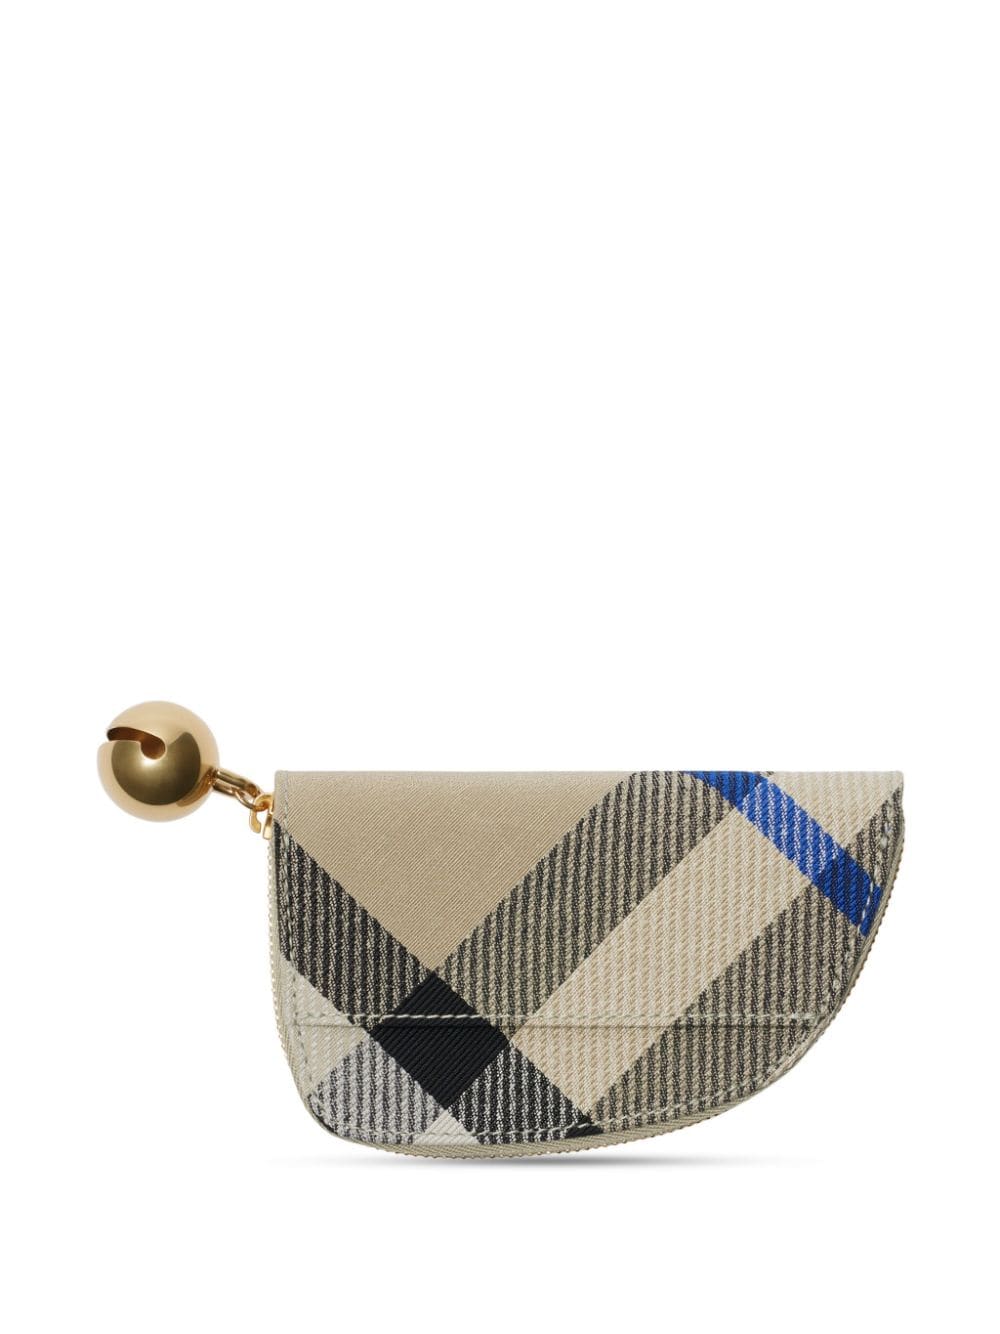 Burberry Shield checked wallet - Beige